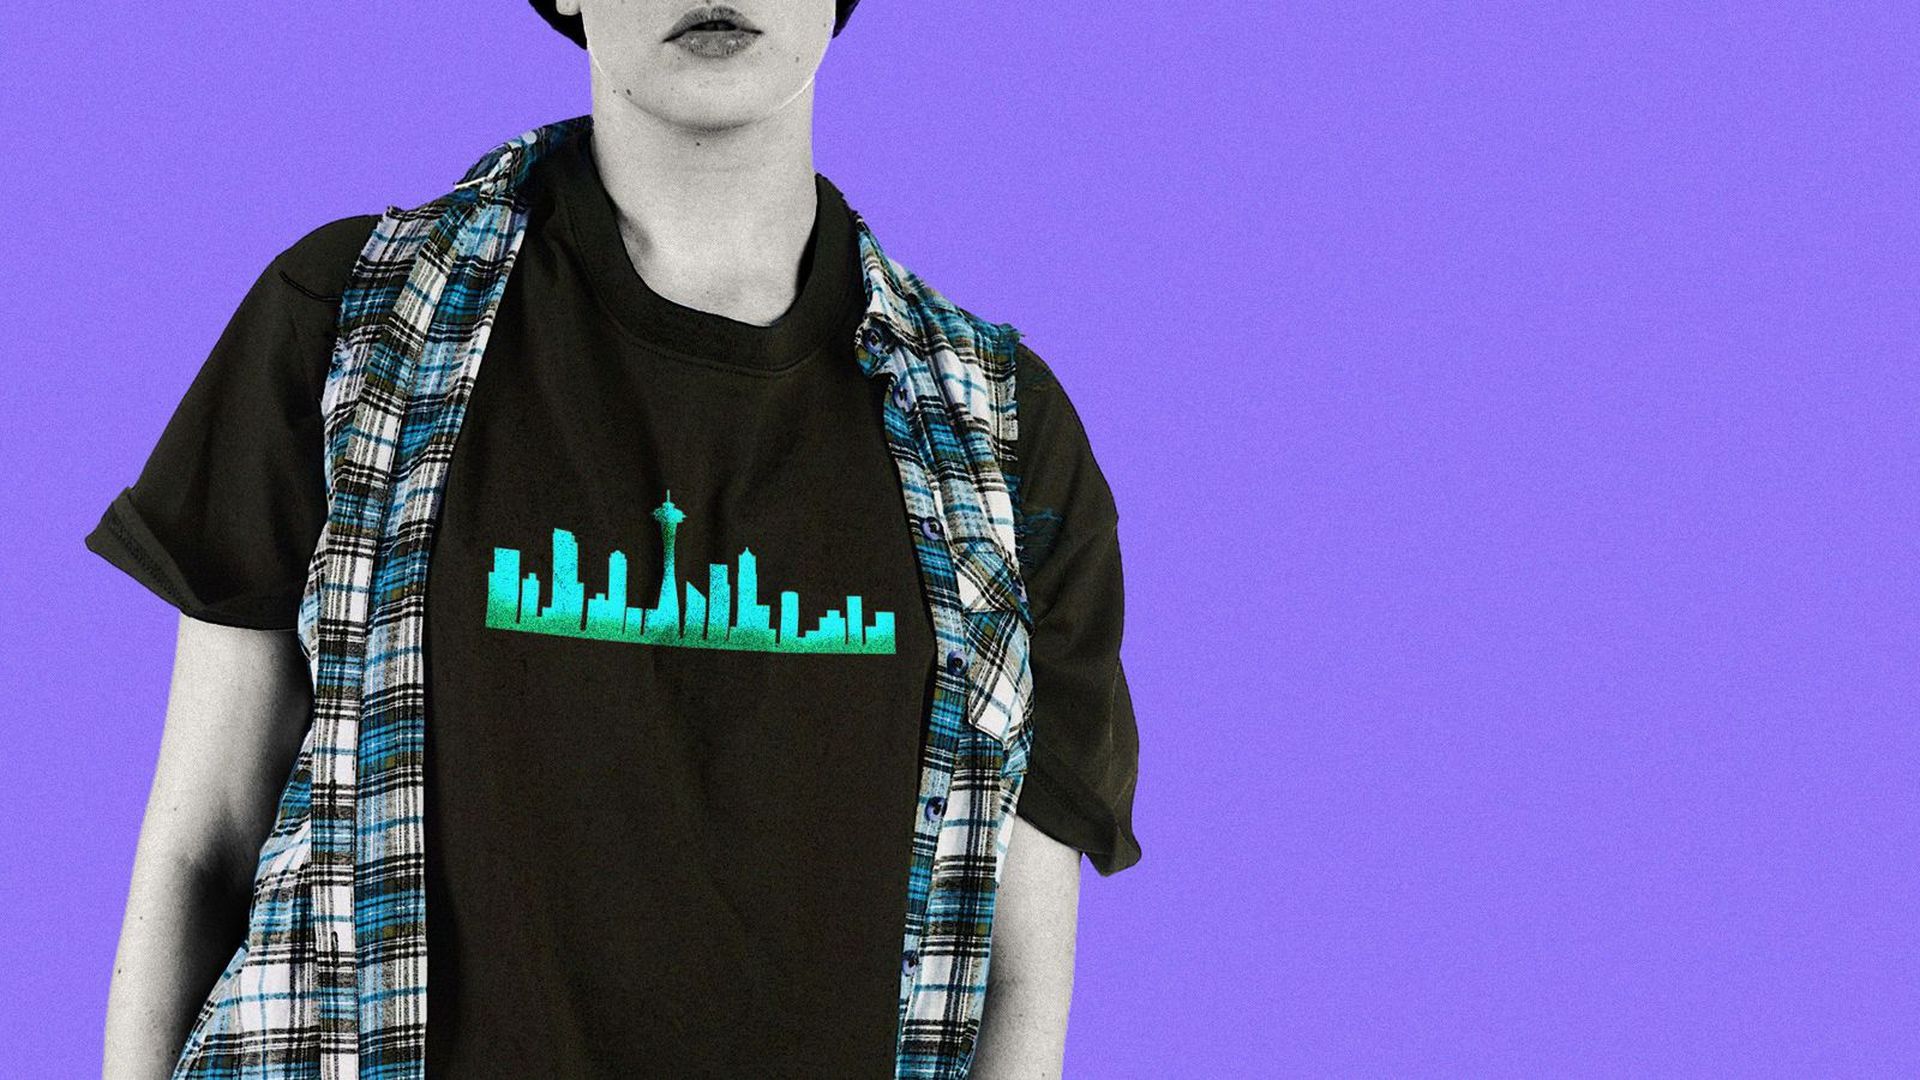 Illustration of person in t-shirt with Seattle skyline graphic